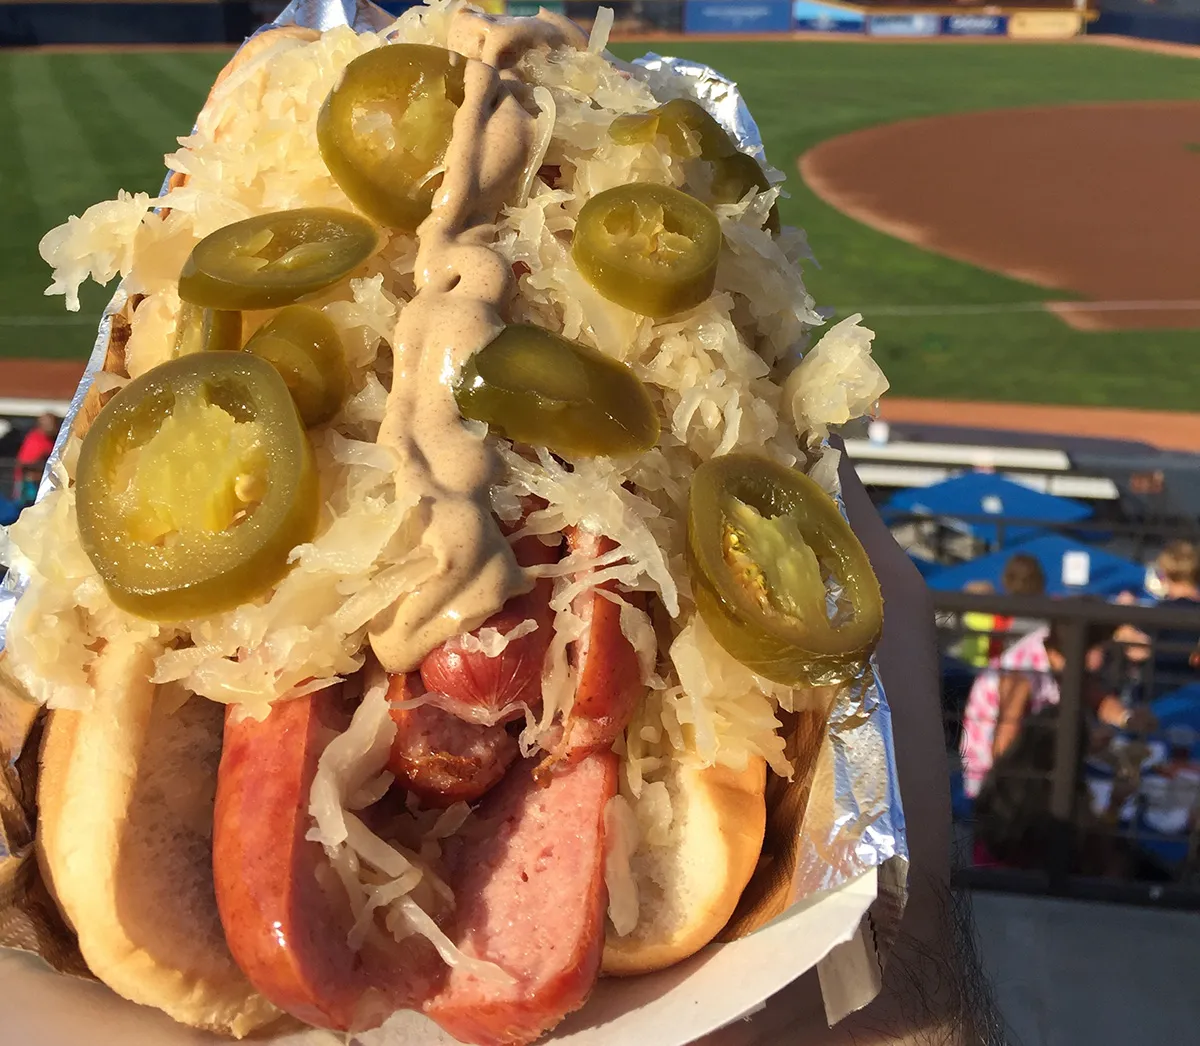 Hot dog loaded with toppings at a baseball park